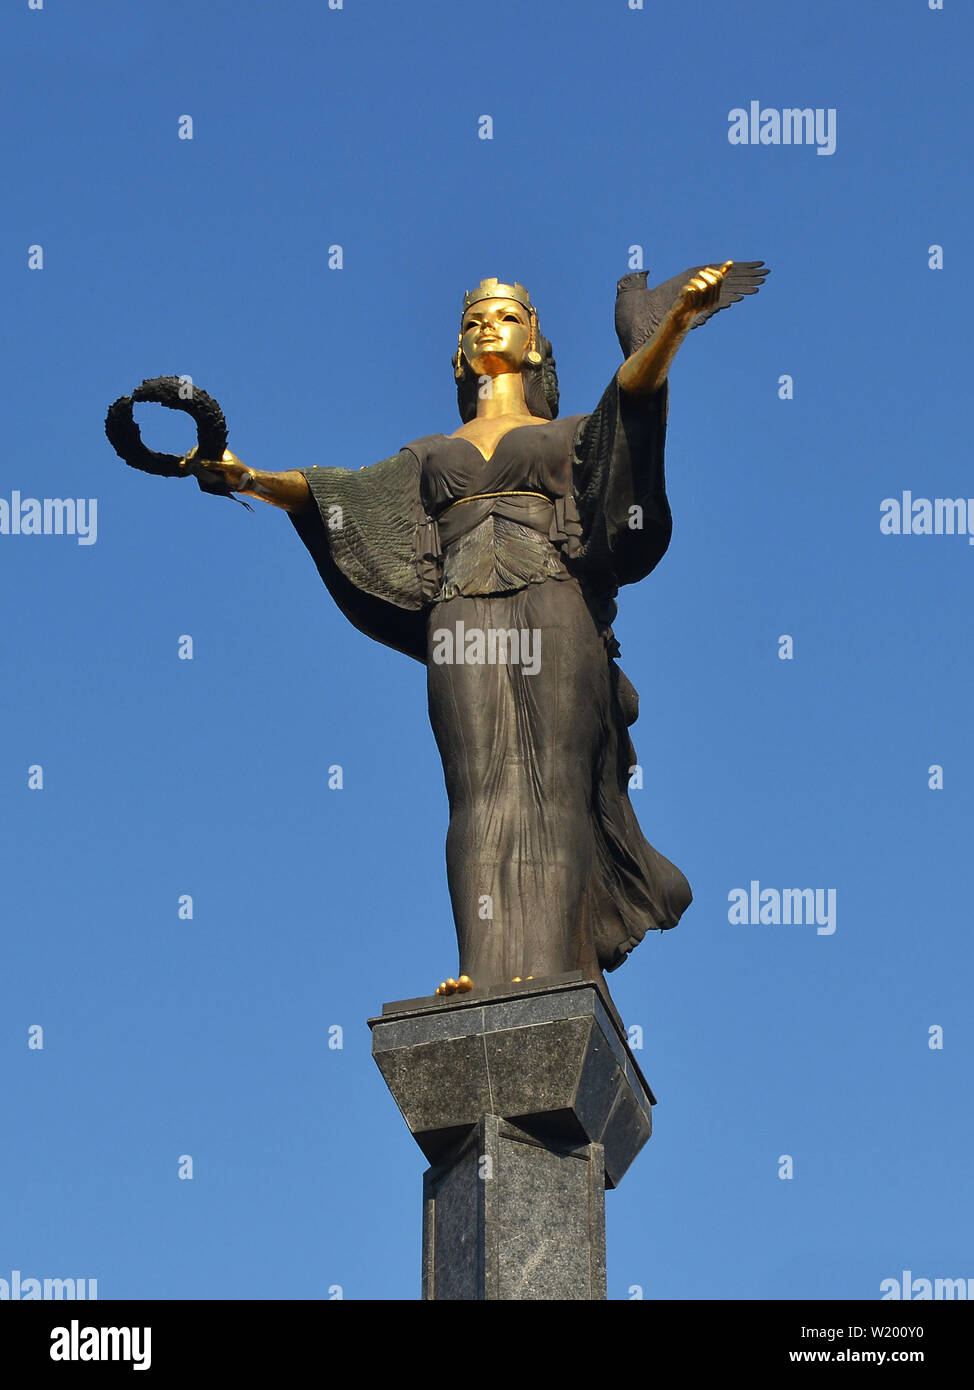 Sophia, Bulgaria, july 2018. Bronze monument in honor of the pagan goddess Sophia the Wise, the patroness of the eponymous capital of Bulgaria. Stock Photo